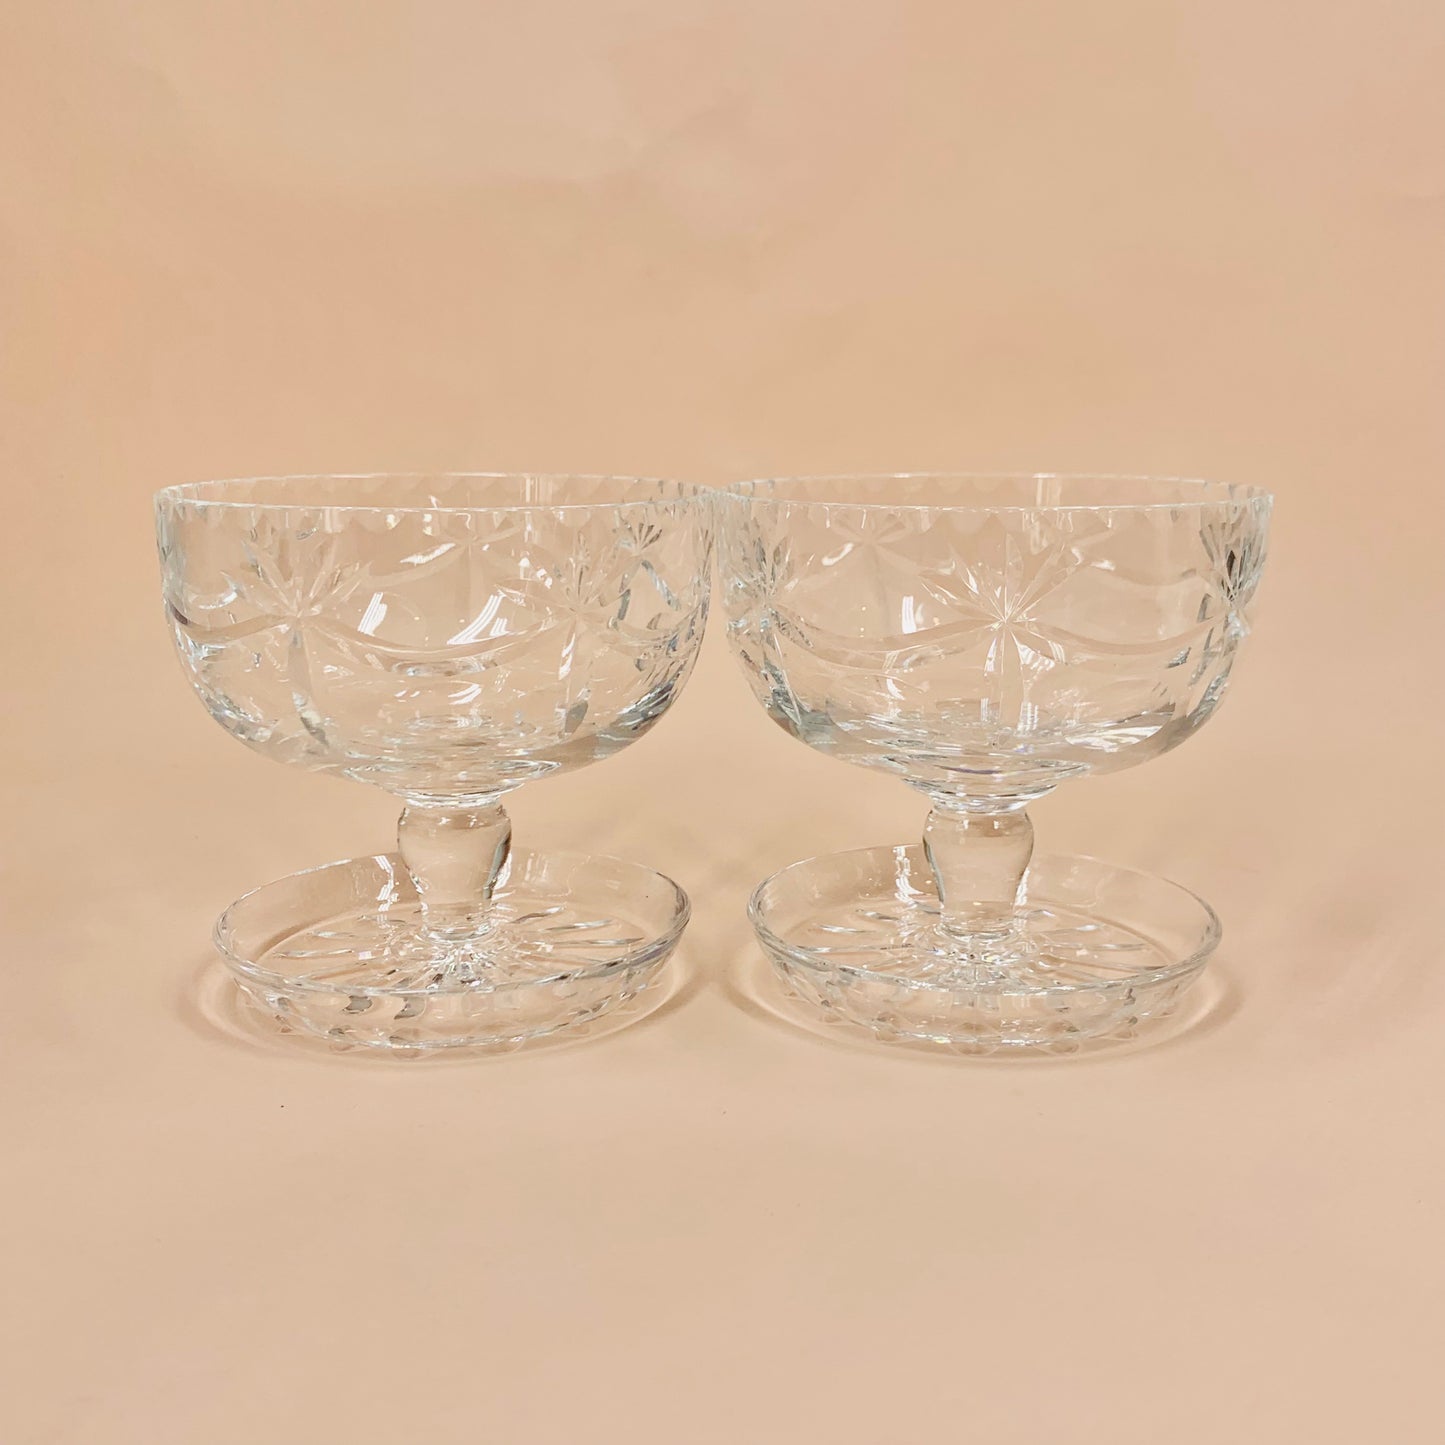 Rare antique Waterford cut crystal dessert bowls/coupe